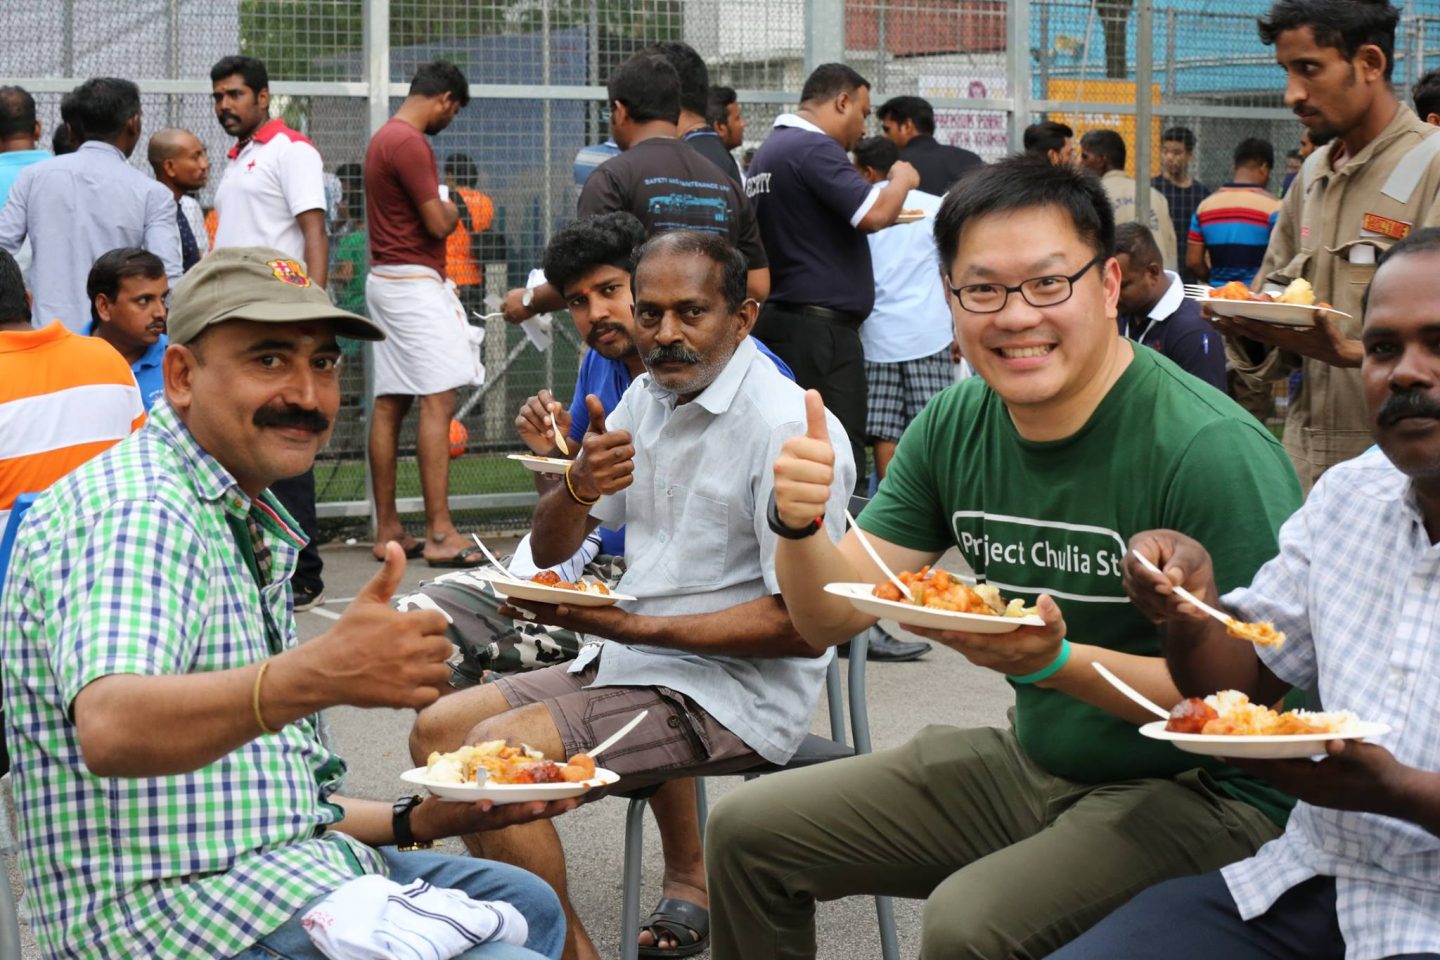 Shaun Lee (second from right), managing director of Project Chulia Street, sharing a meal with migrant workers at the recent fiesta at Westlite Woodlands Dormitory. Photo courtesy of Project Chulia Street.